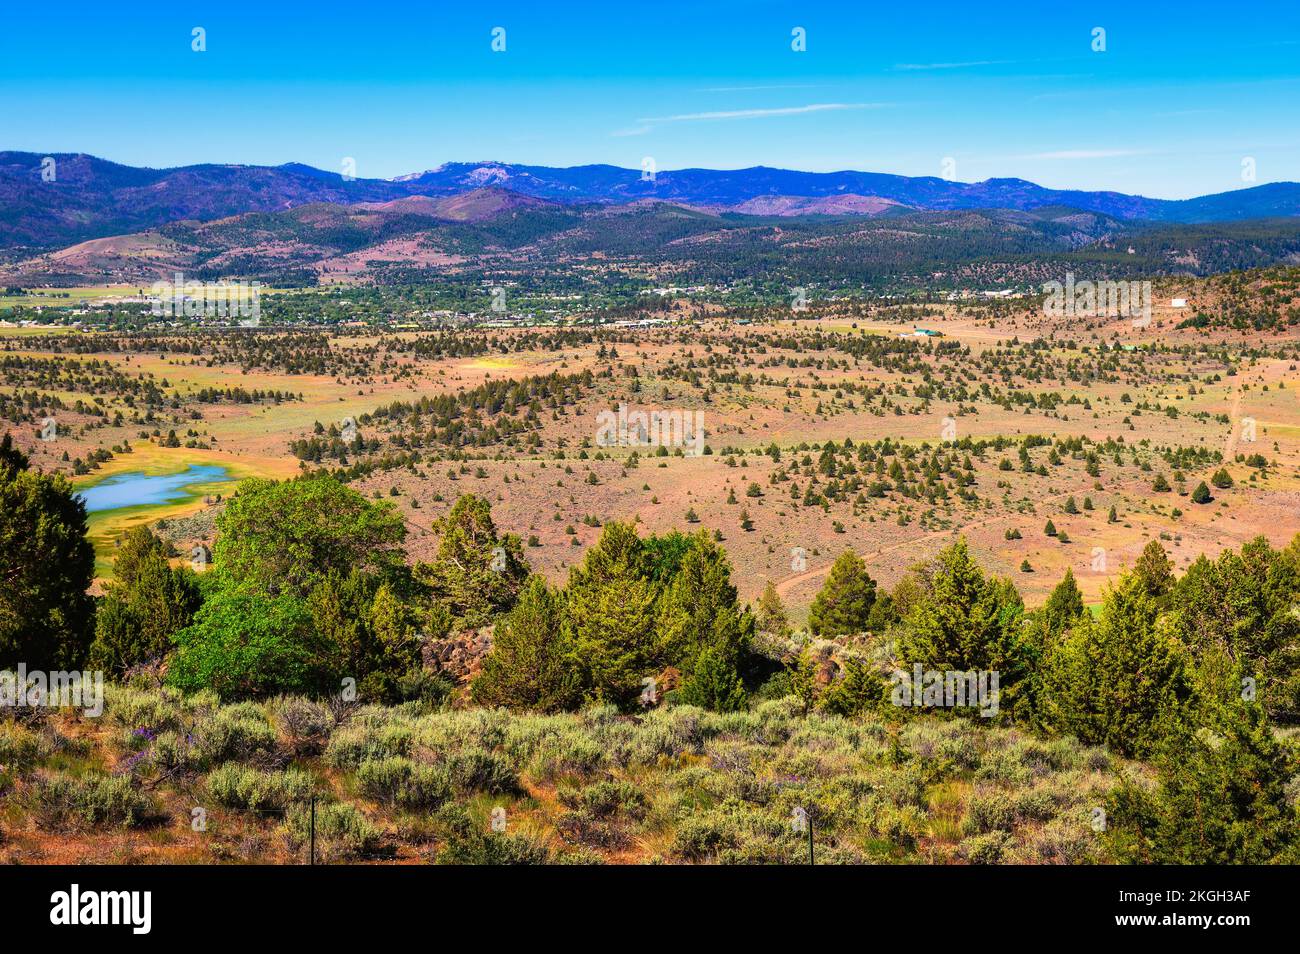 Susanville in California viewed from U.S. Route 139 Stock Photo